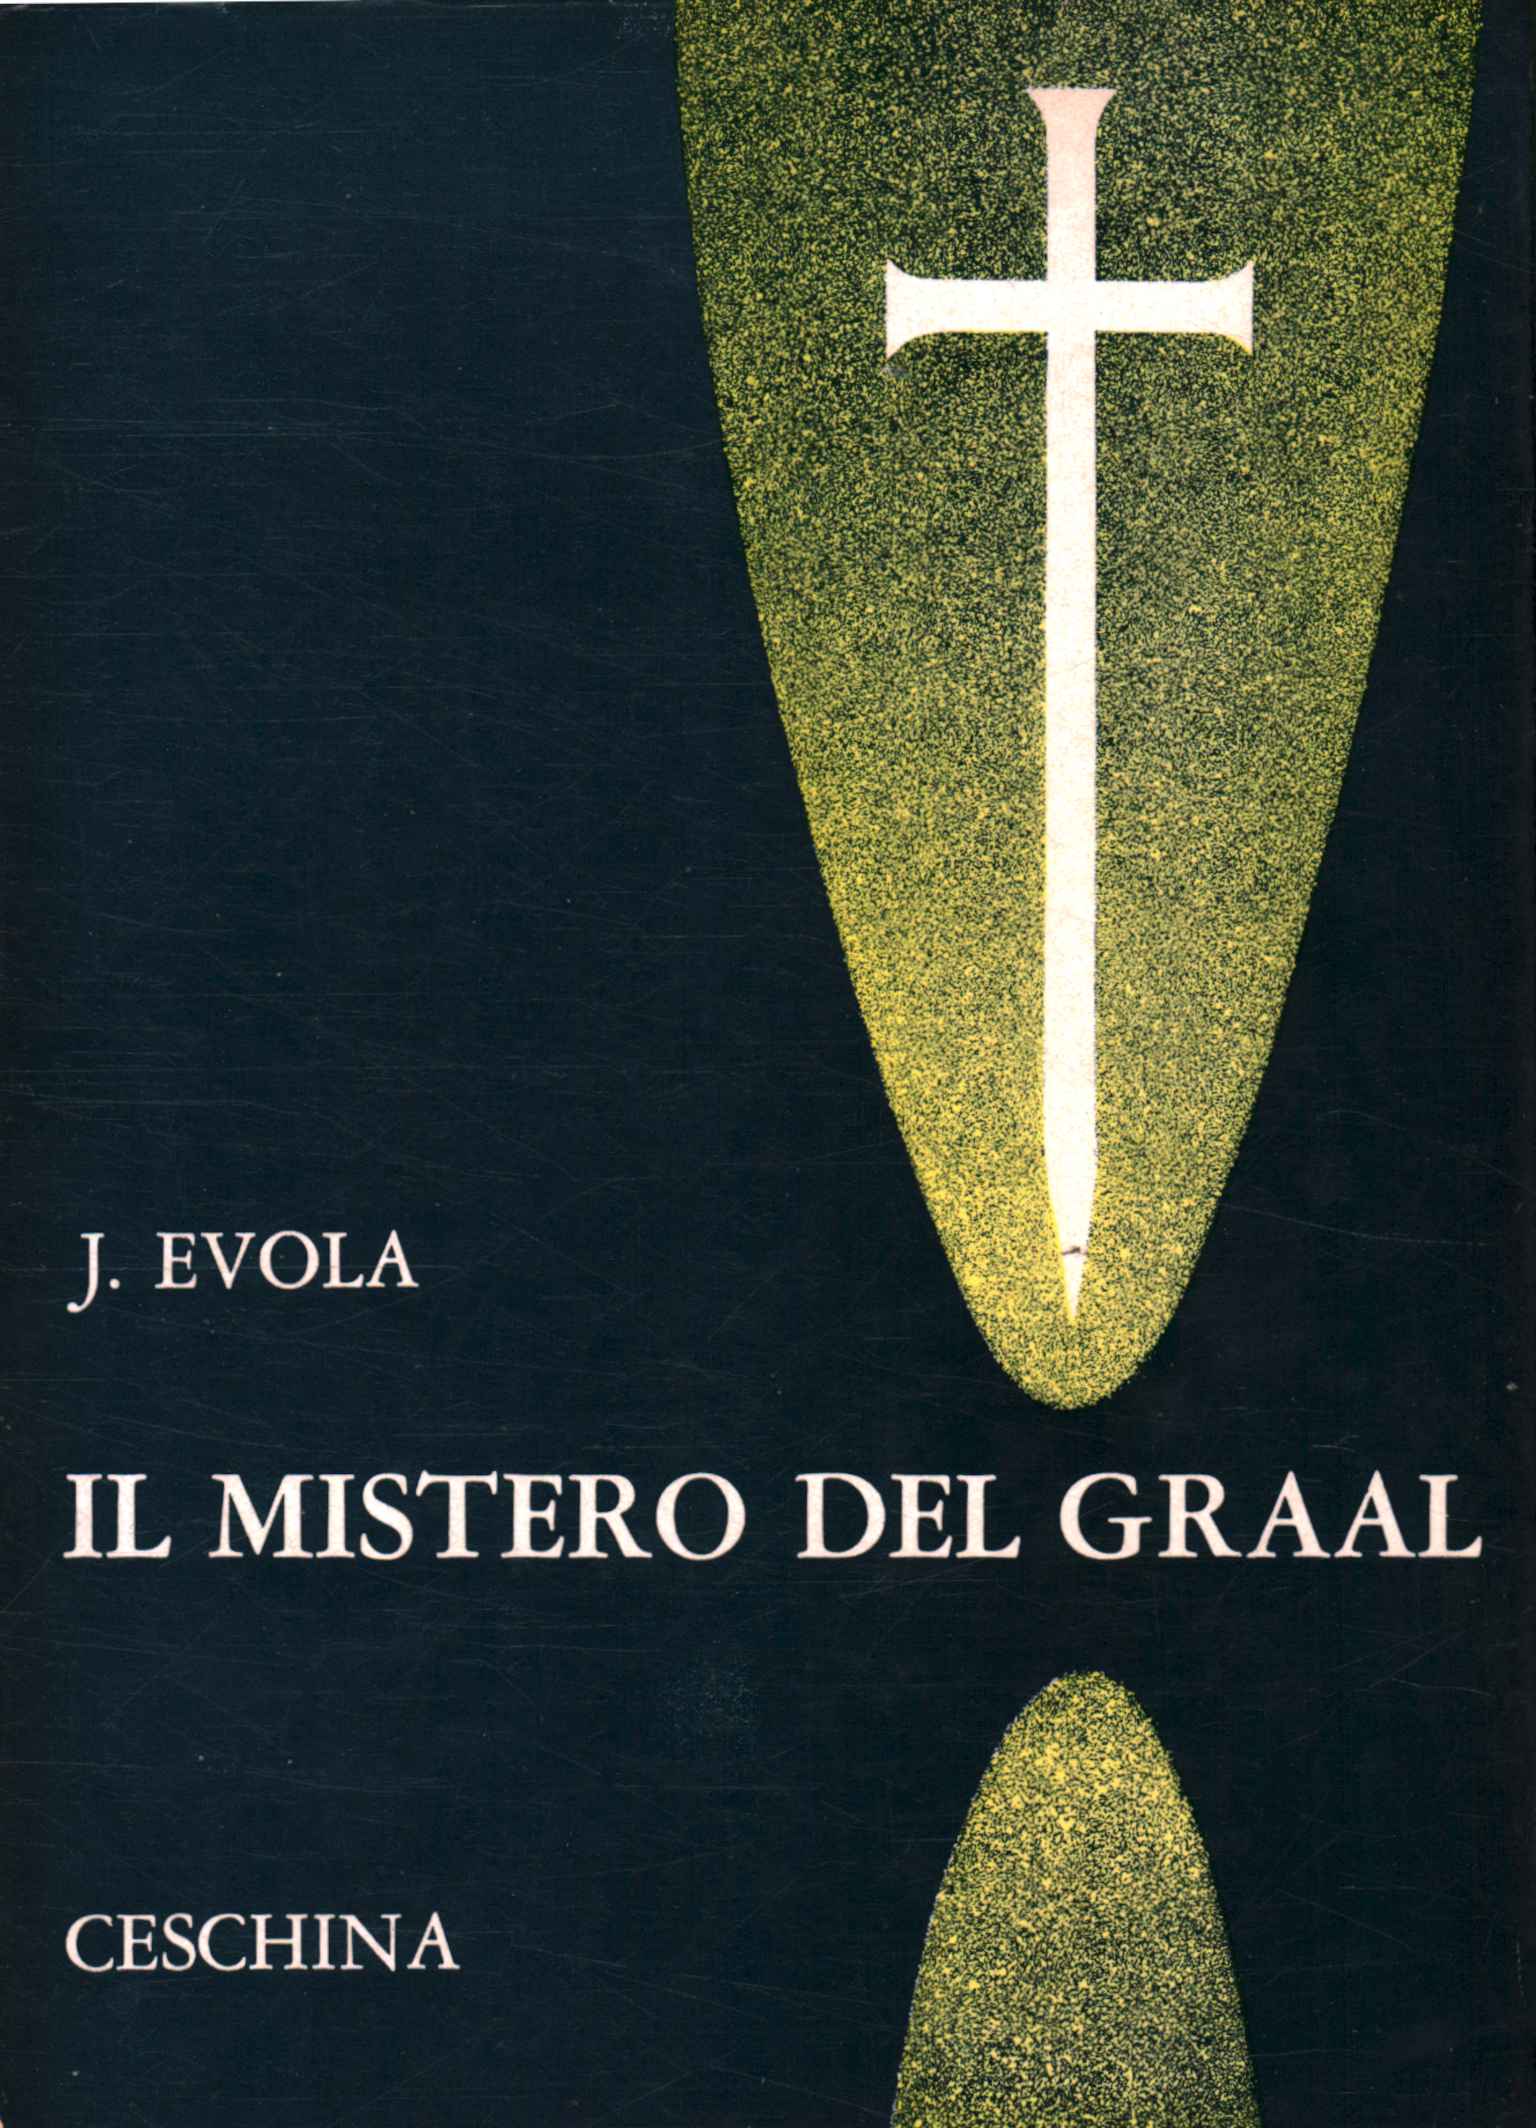 The mystery of the fraal,The mystery of the Grail